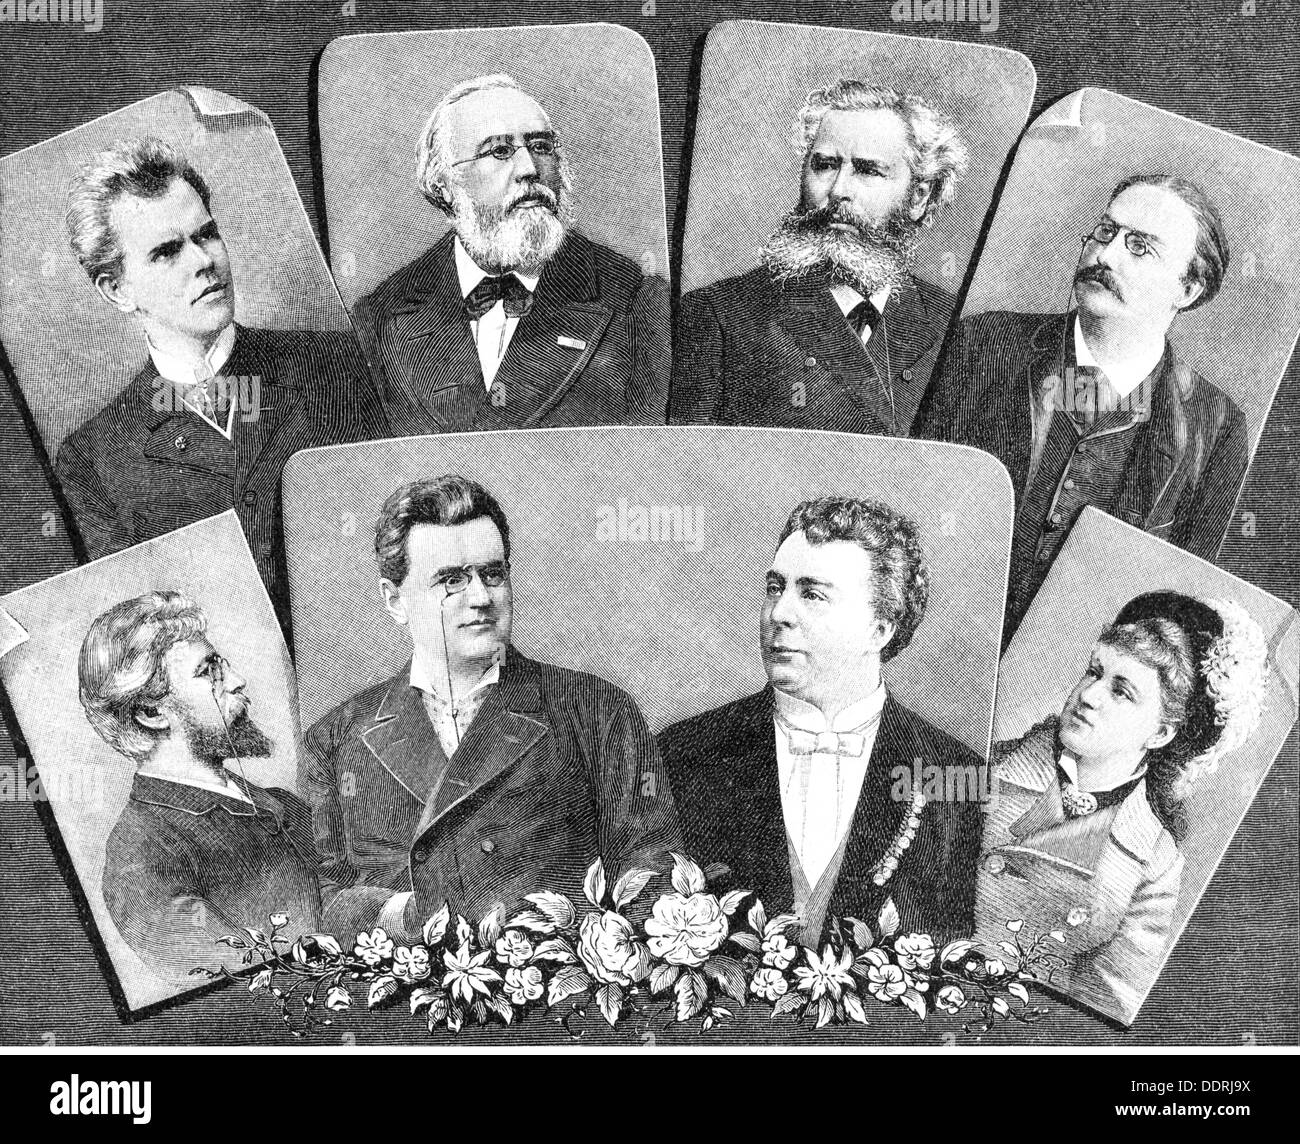 poetry groups, Munich poets of the turn of the century, collective sheet, wood engraving, from: 'Die Gartenlaube', Leipzig, 1889, Additional-Rights-Clearences-Not Available Stock Photo